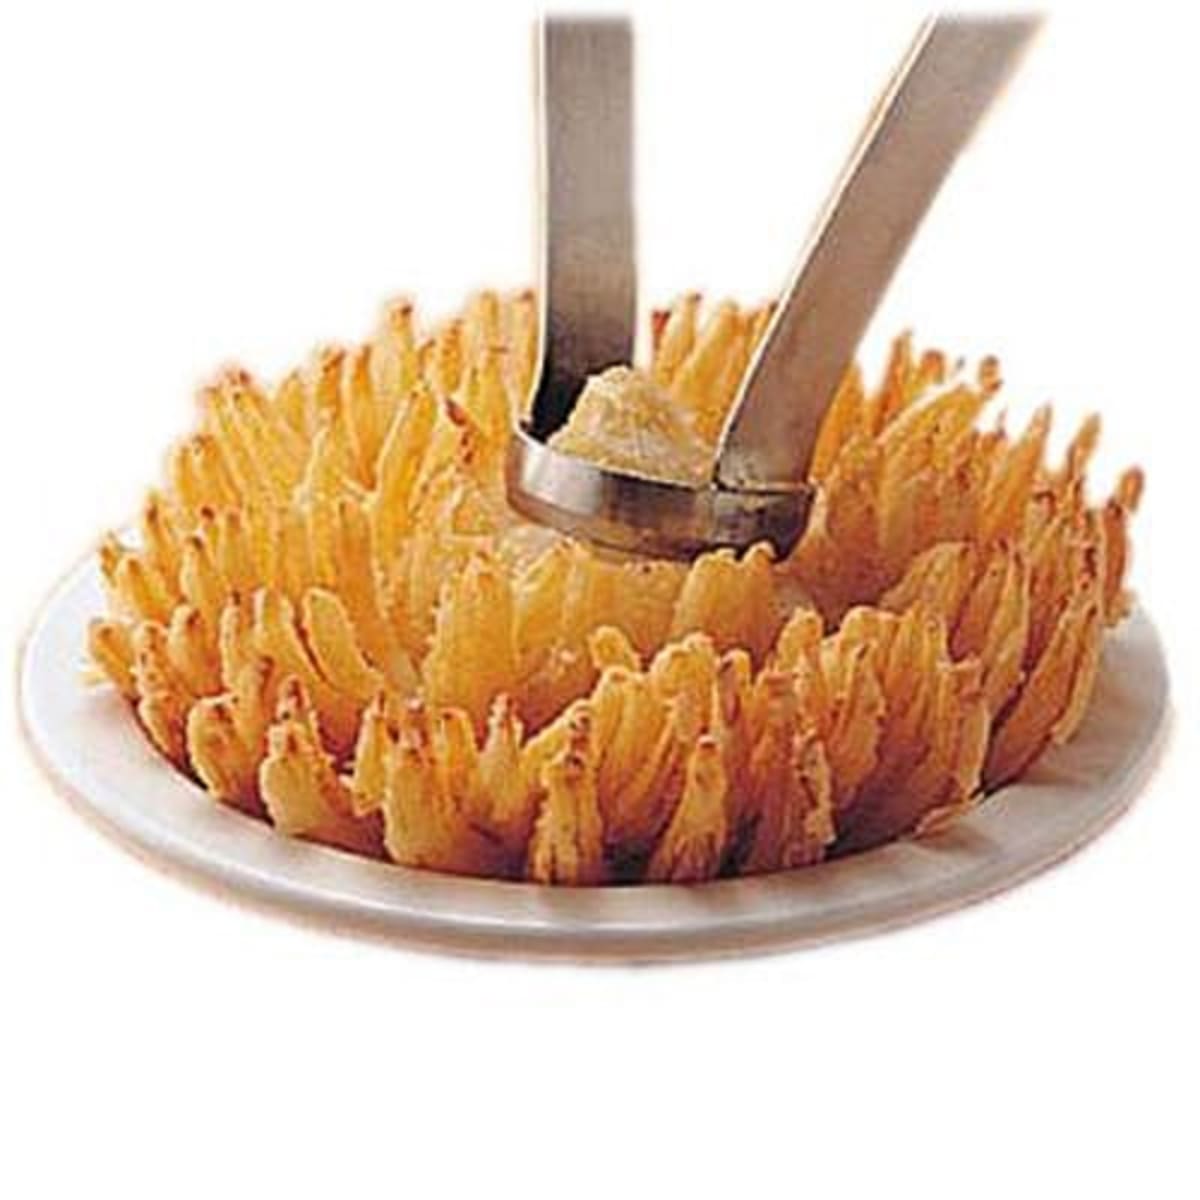 Nemco Blooming Onion Cutter (55700)